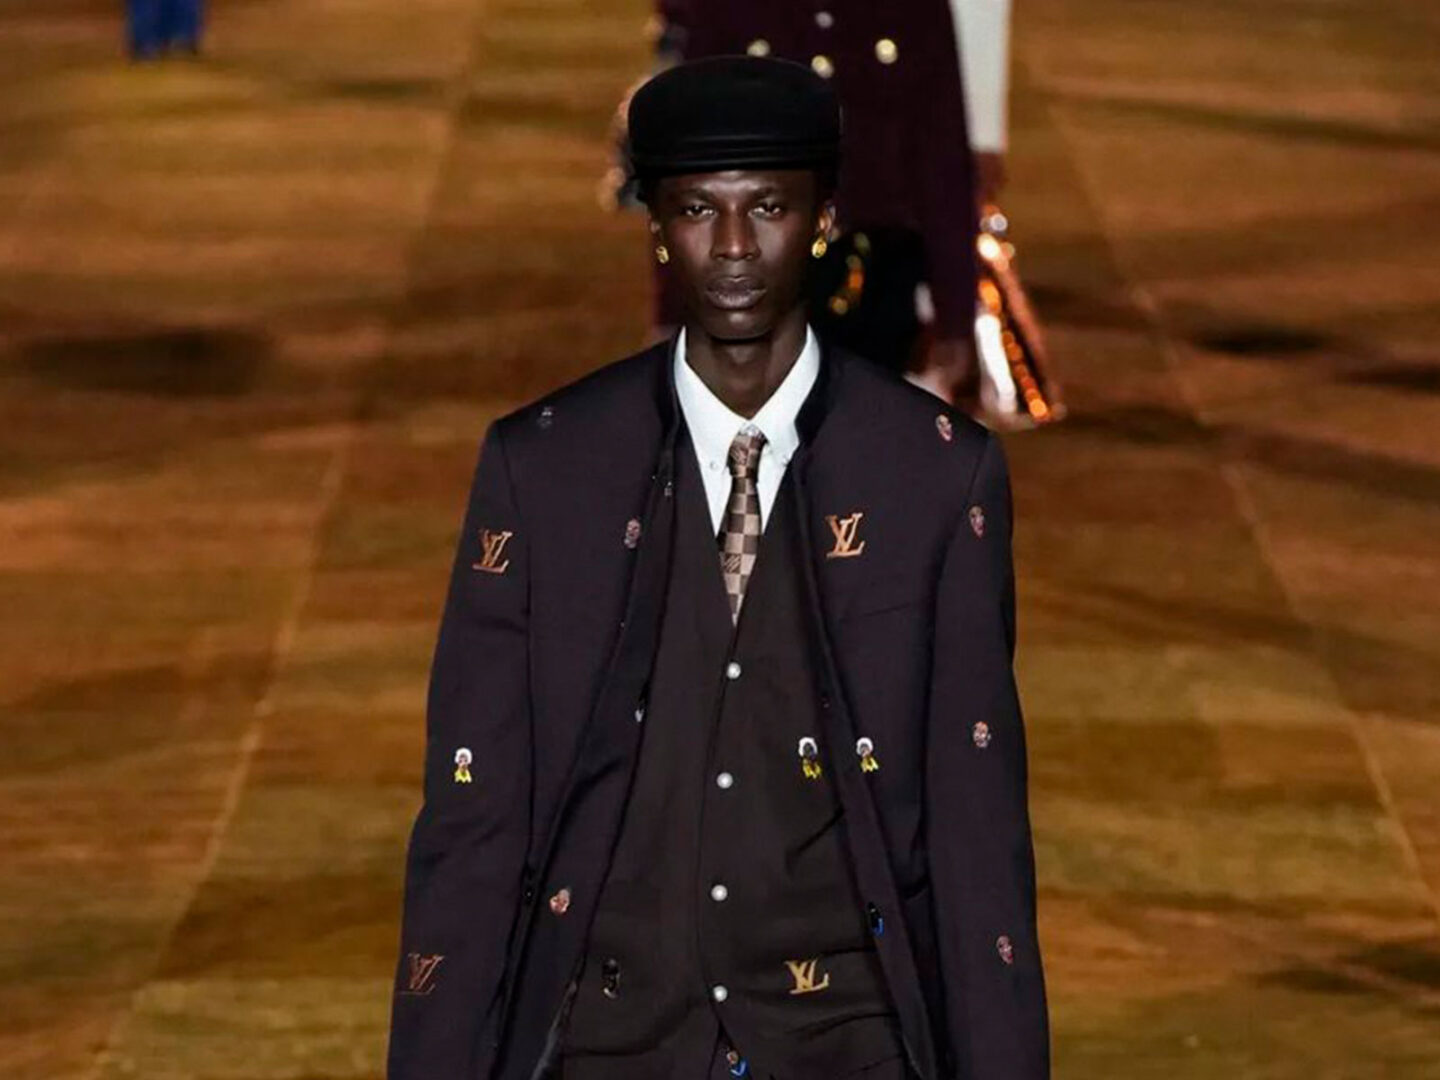 Who is Henry Taylor, the artist Pharrell referenced in his debut for Louis Vuitton?